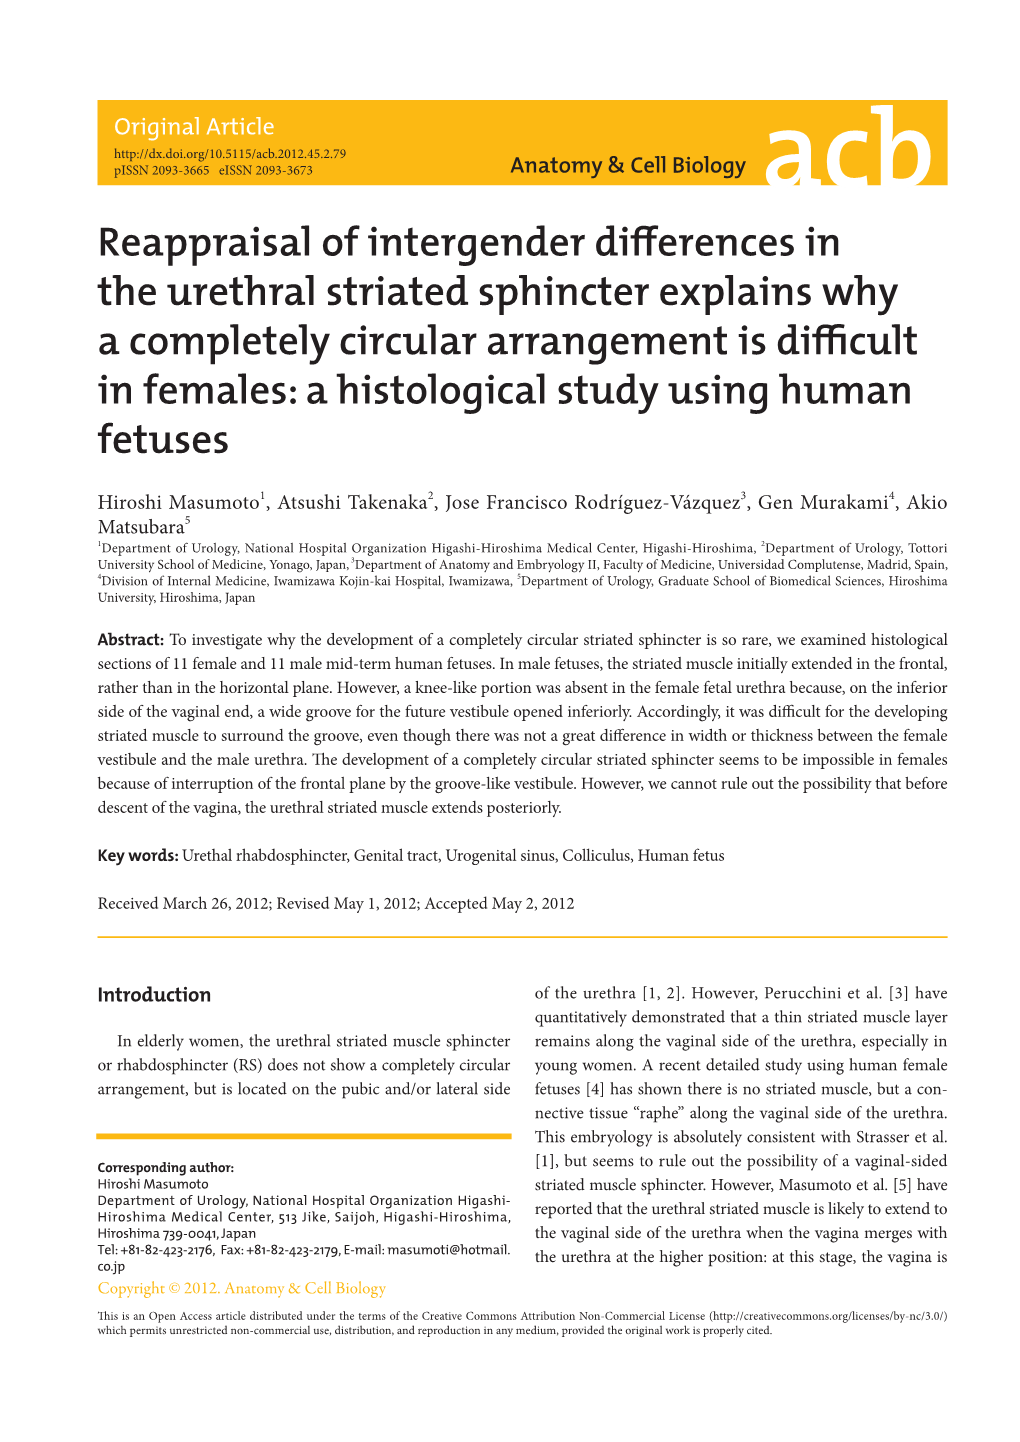 Reappraisal of Intergender Differences in the Urethral Striated